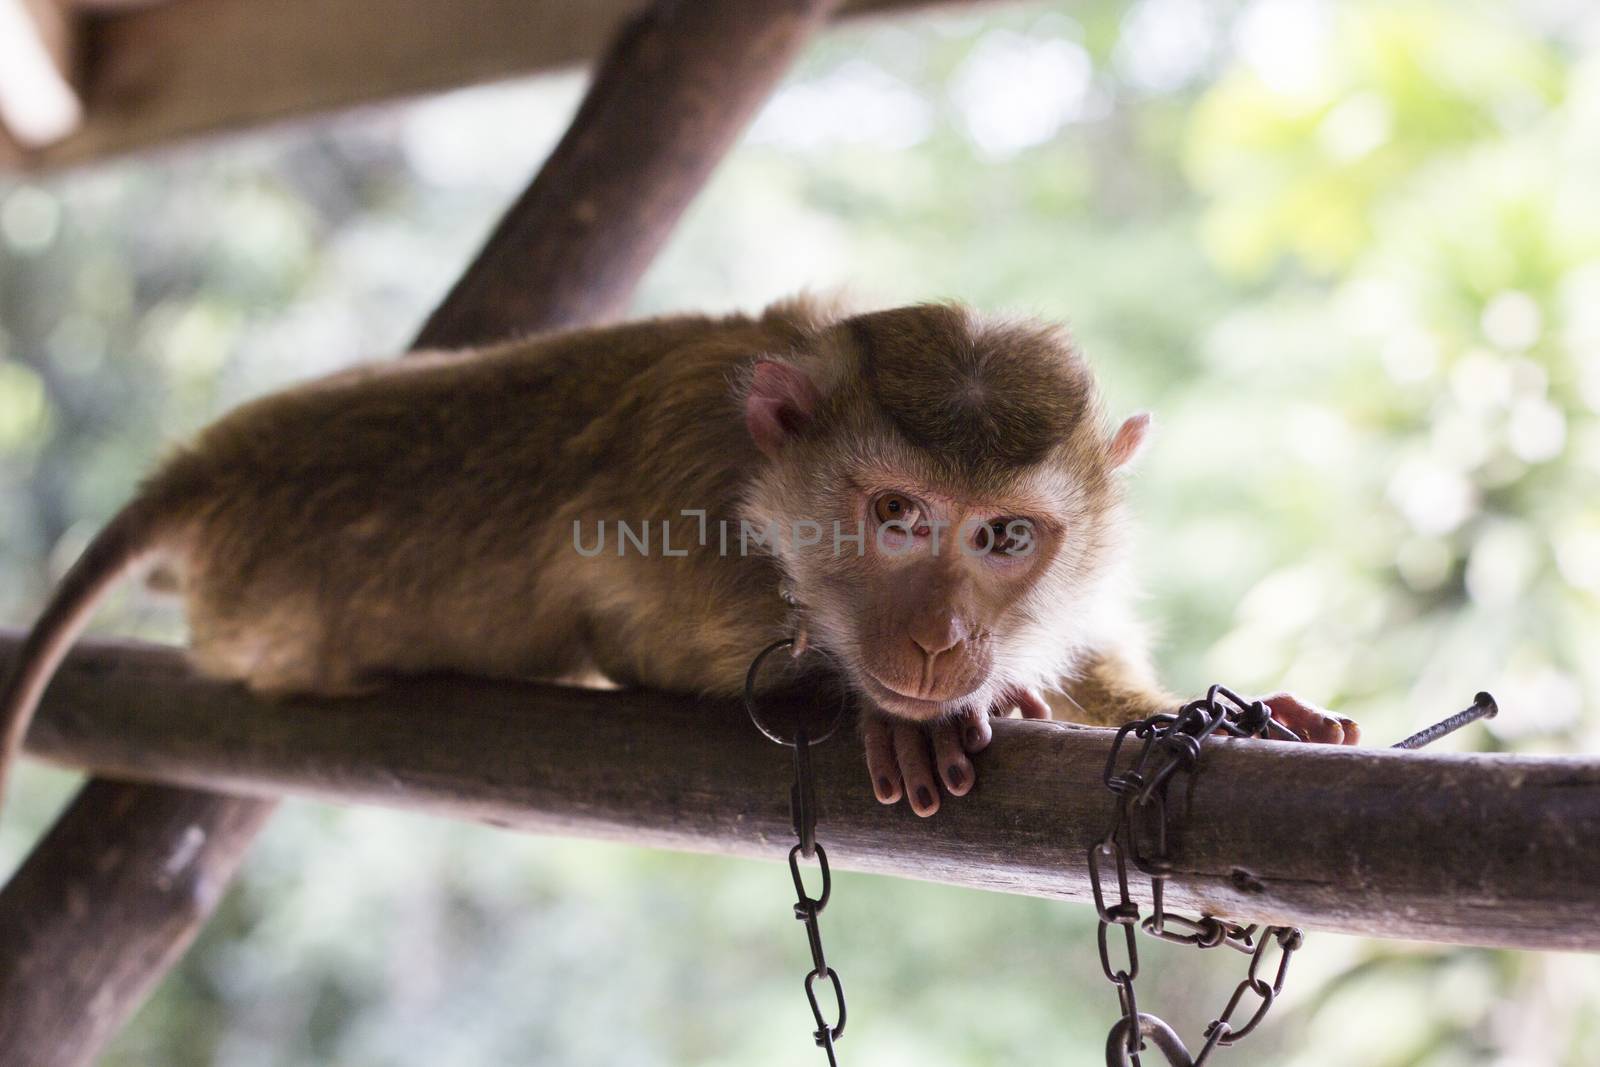 Monkey in Chain looking at the camera